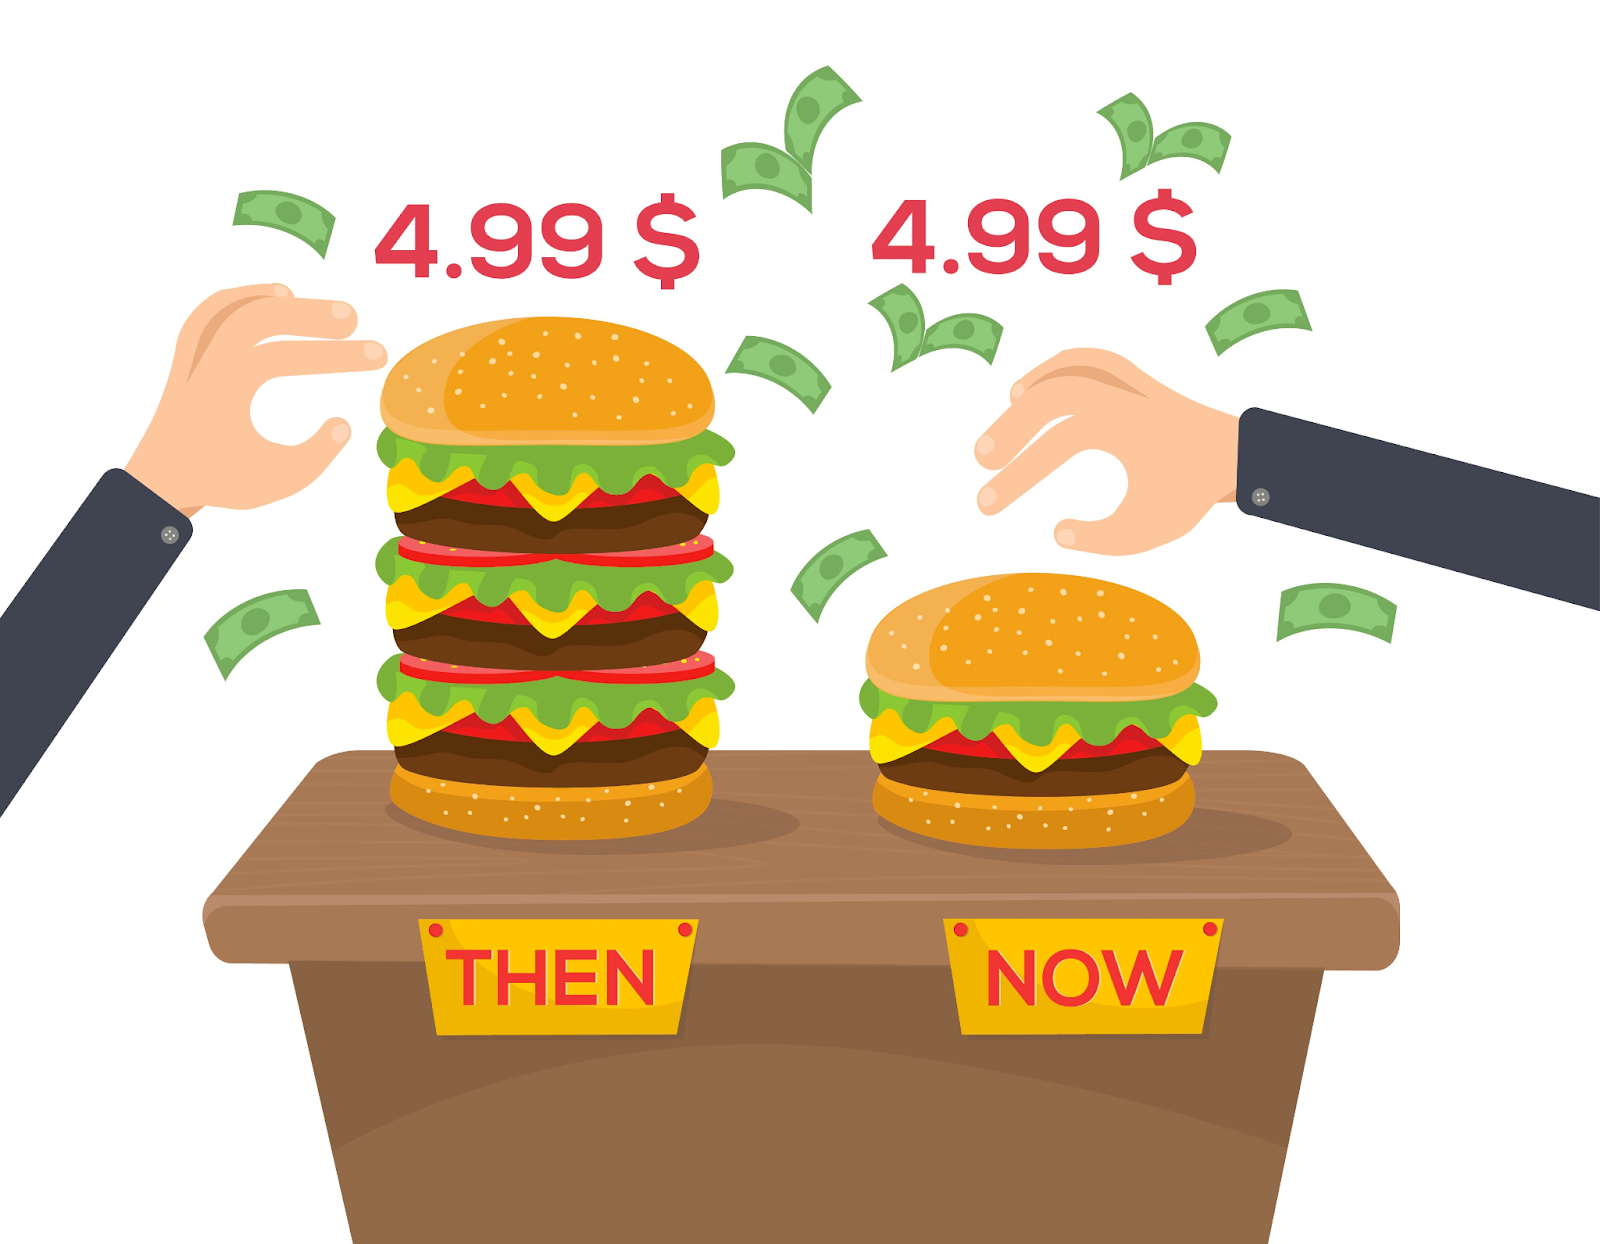 Then vs now, prices remain the same, but the actual value increases/decreases.